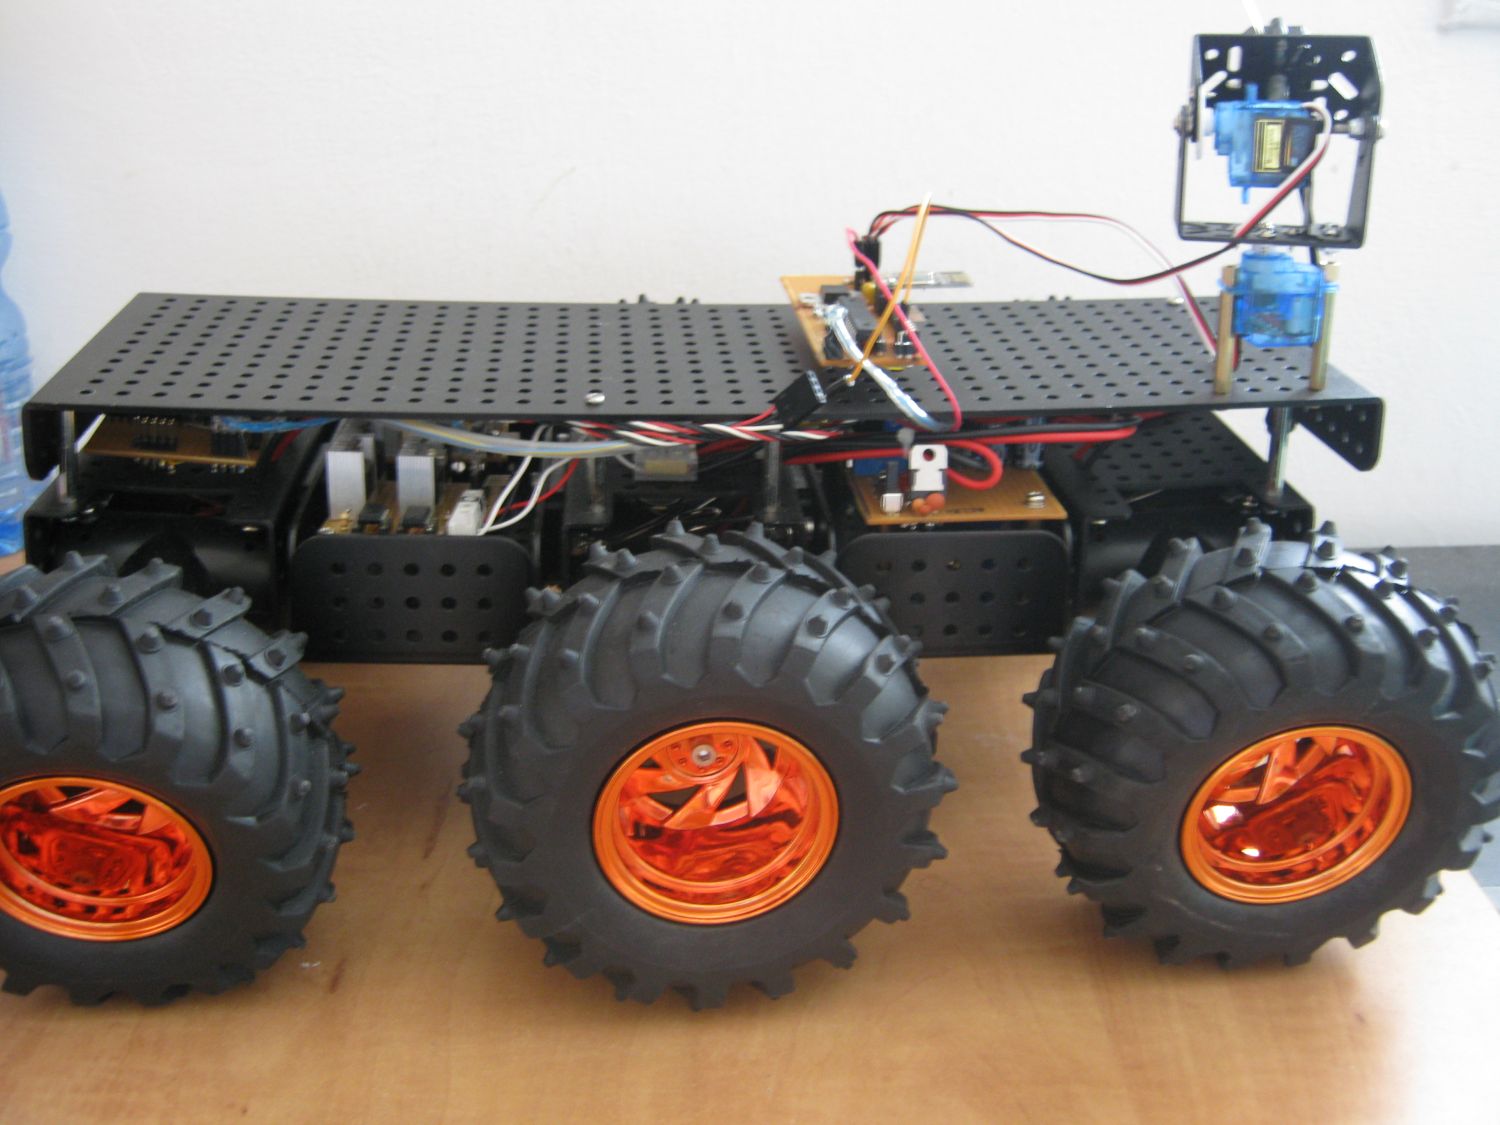 Wild Thumper Robot Kit with with hardware mounted.